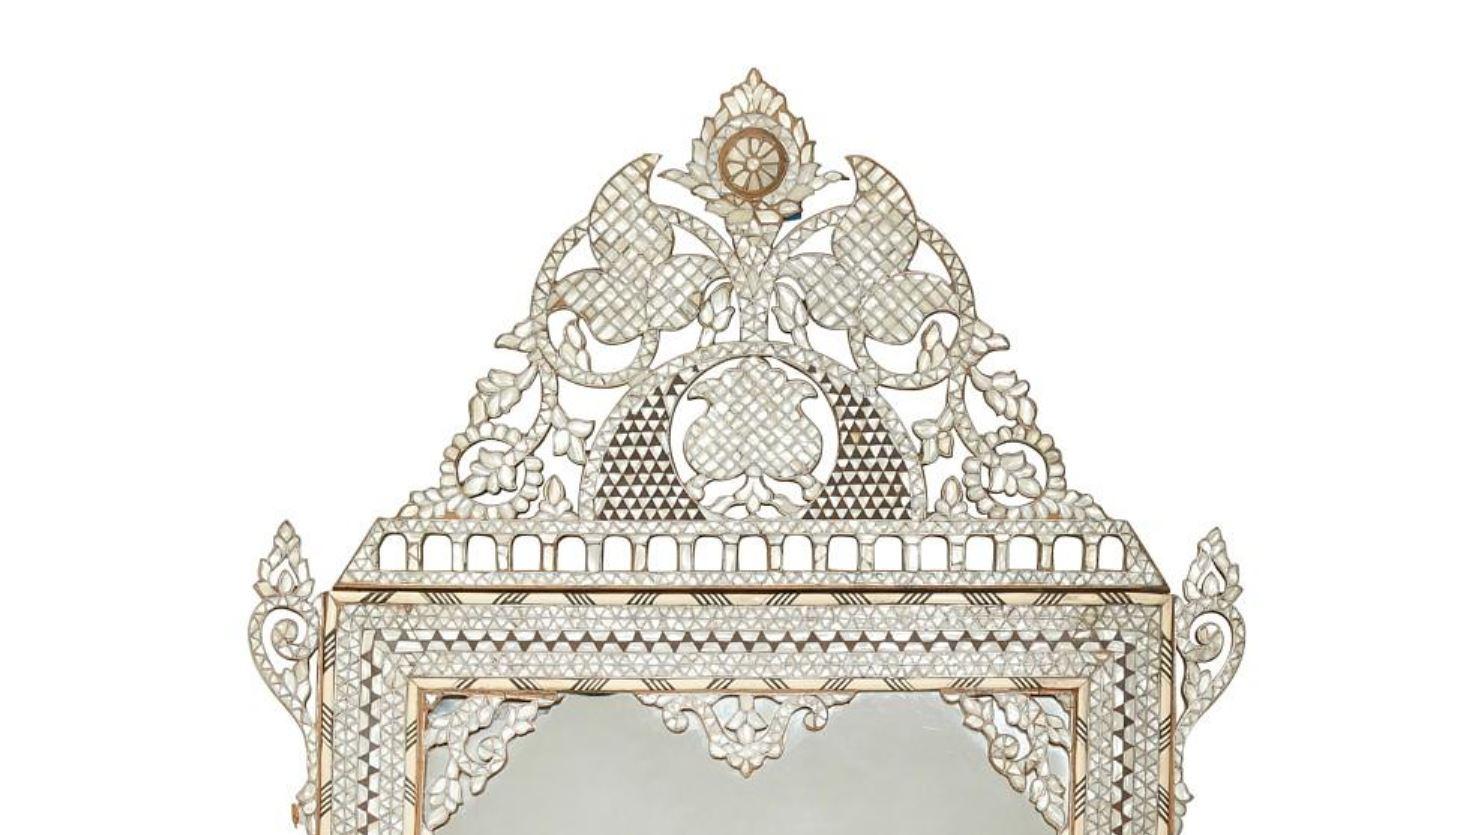 Hand-Crafted Levantine Mother Of Pearl Inlaid Mirror, Late 19th Century